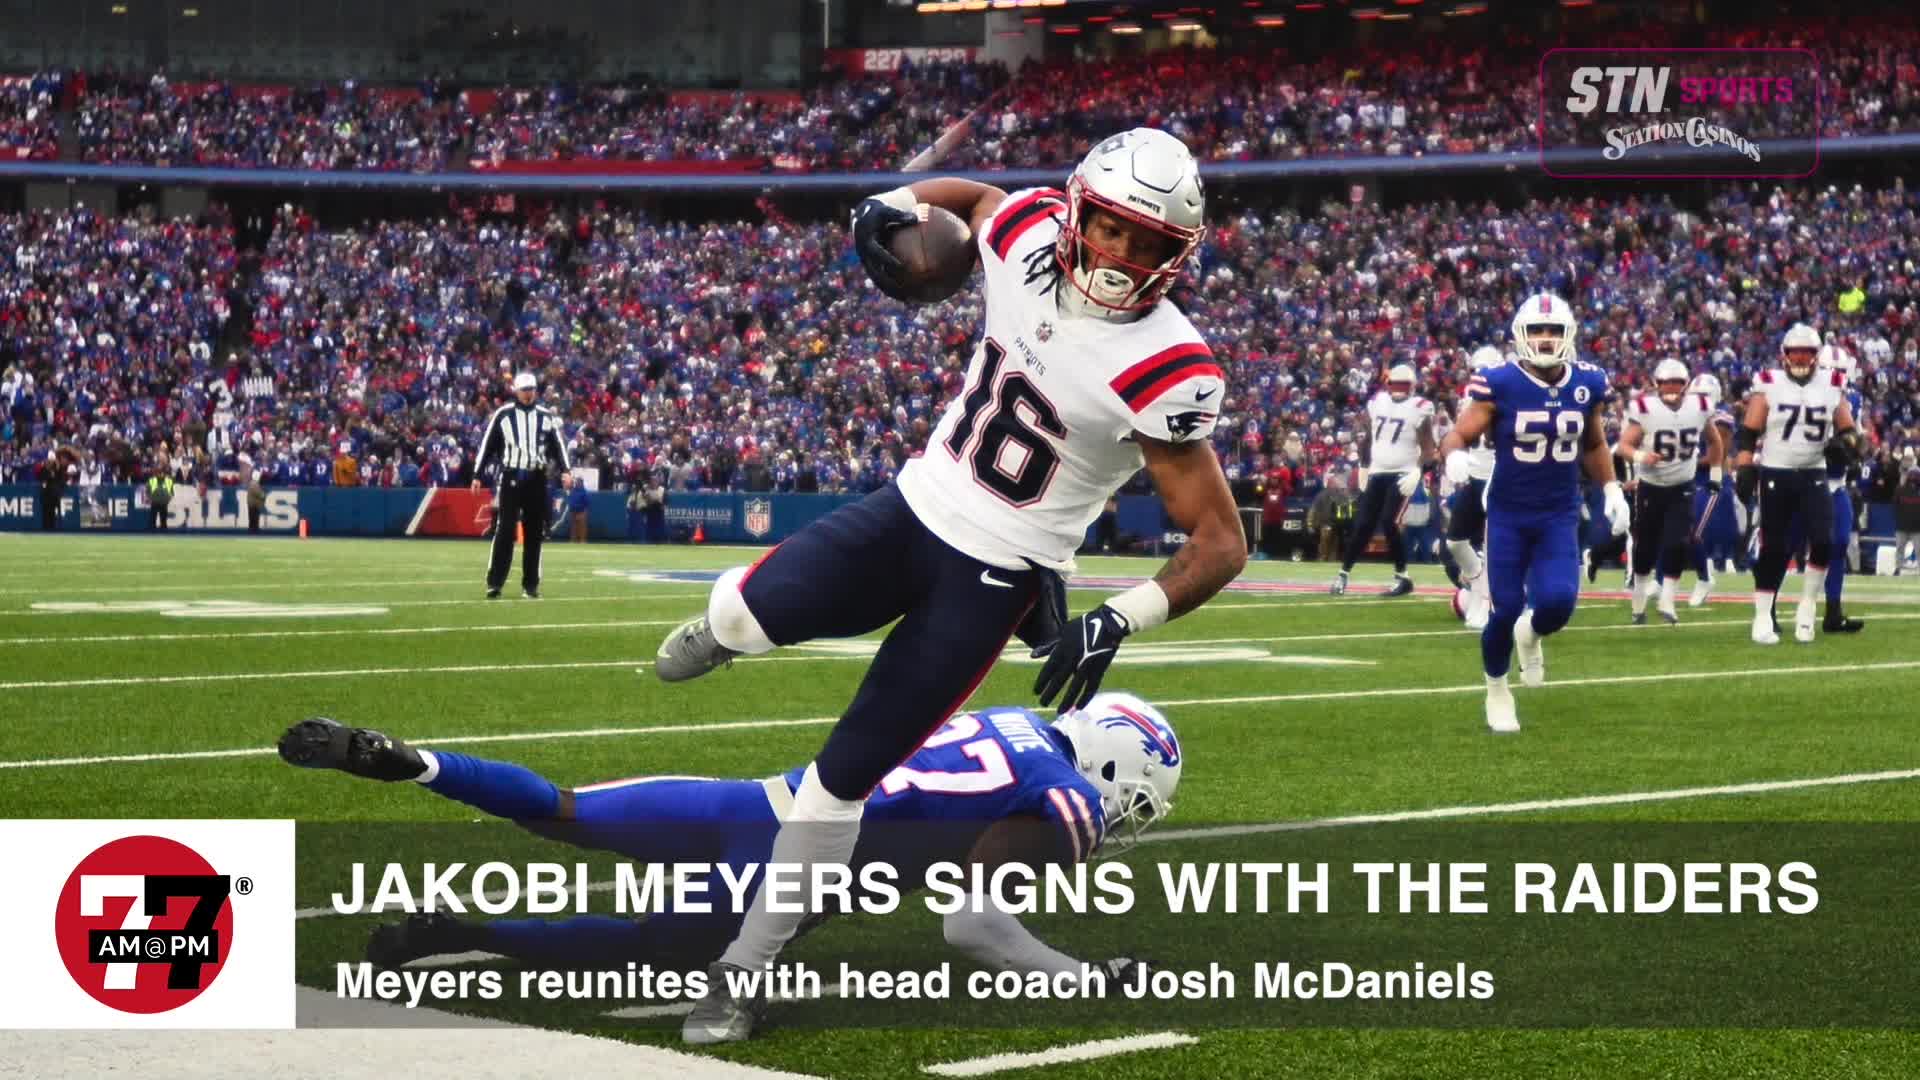 Jakobi Meyers signs with the Raiders